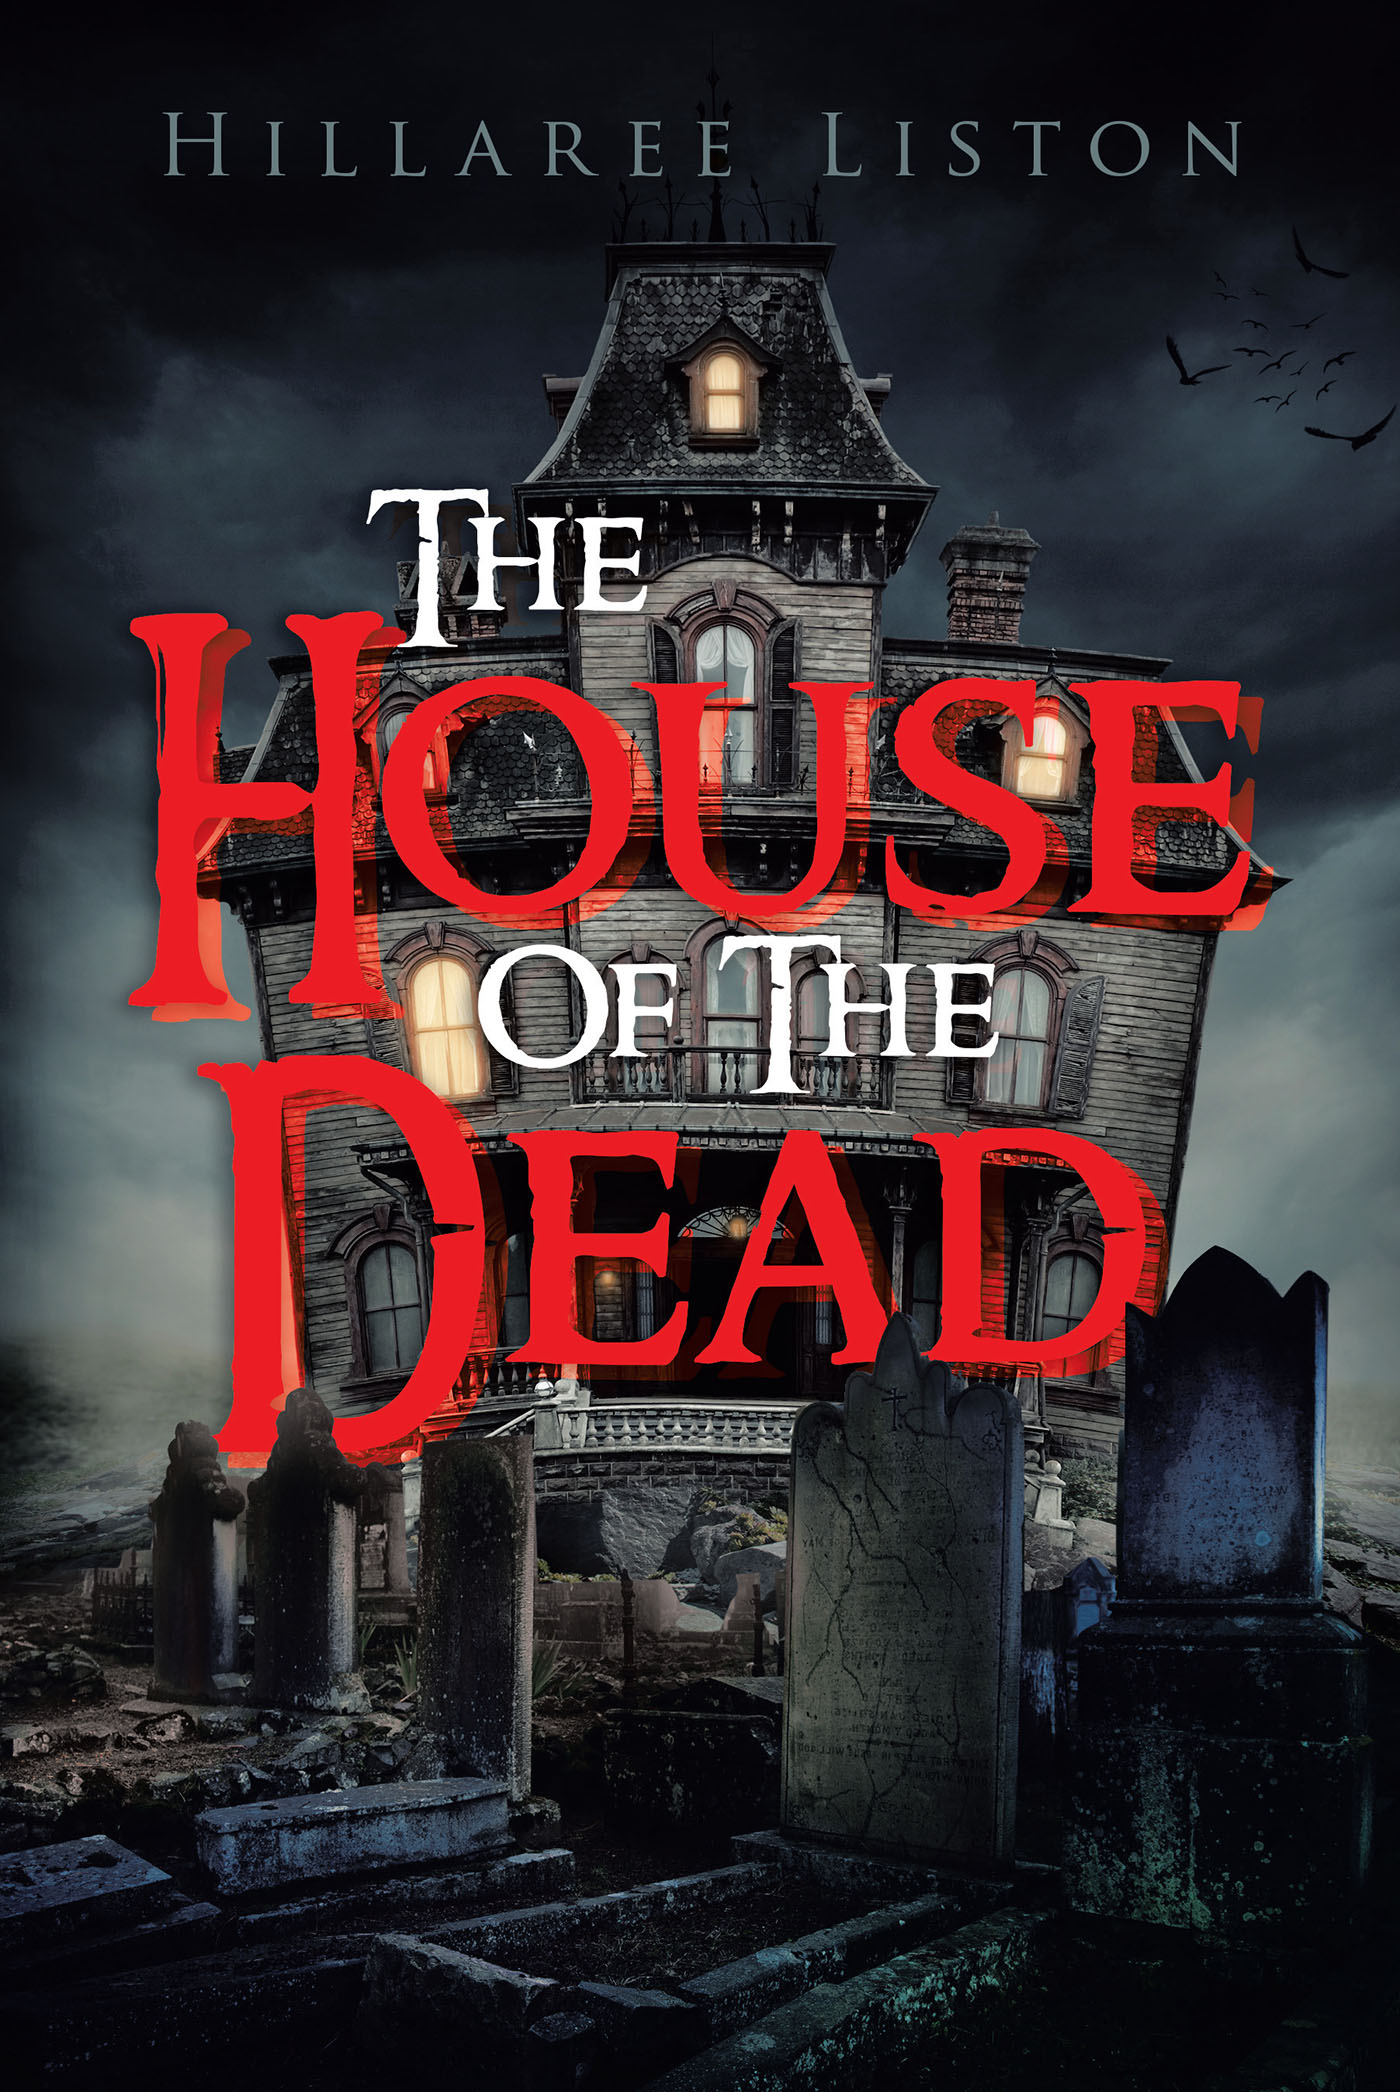 The House of the Dead Cover Image